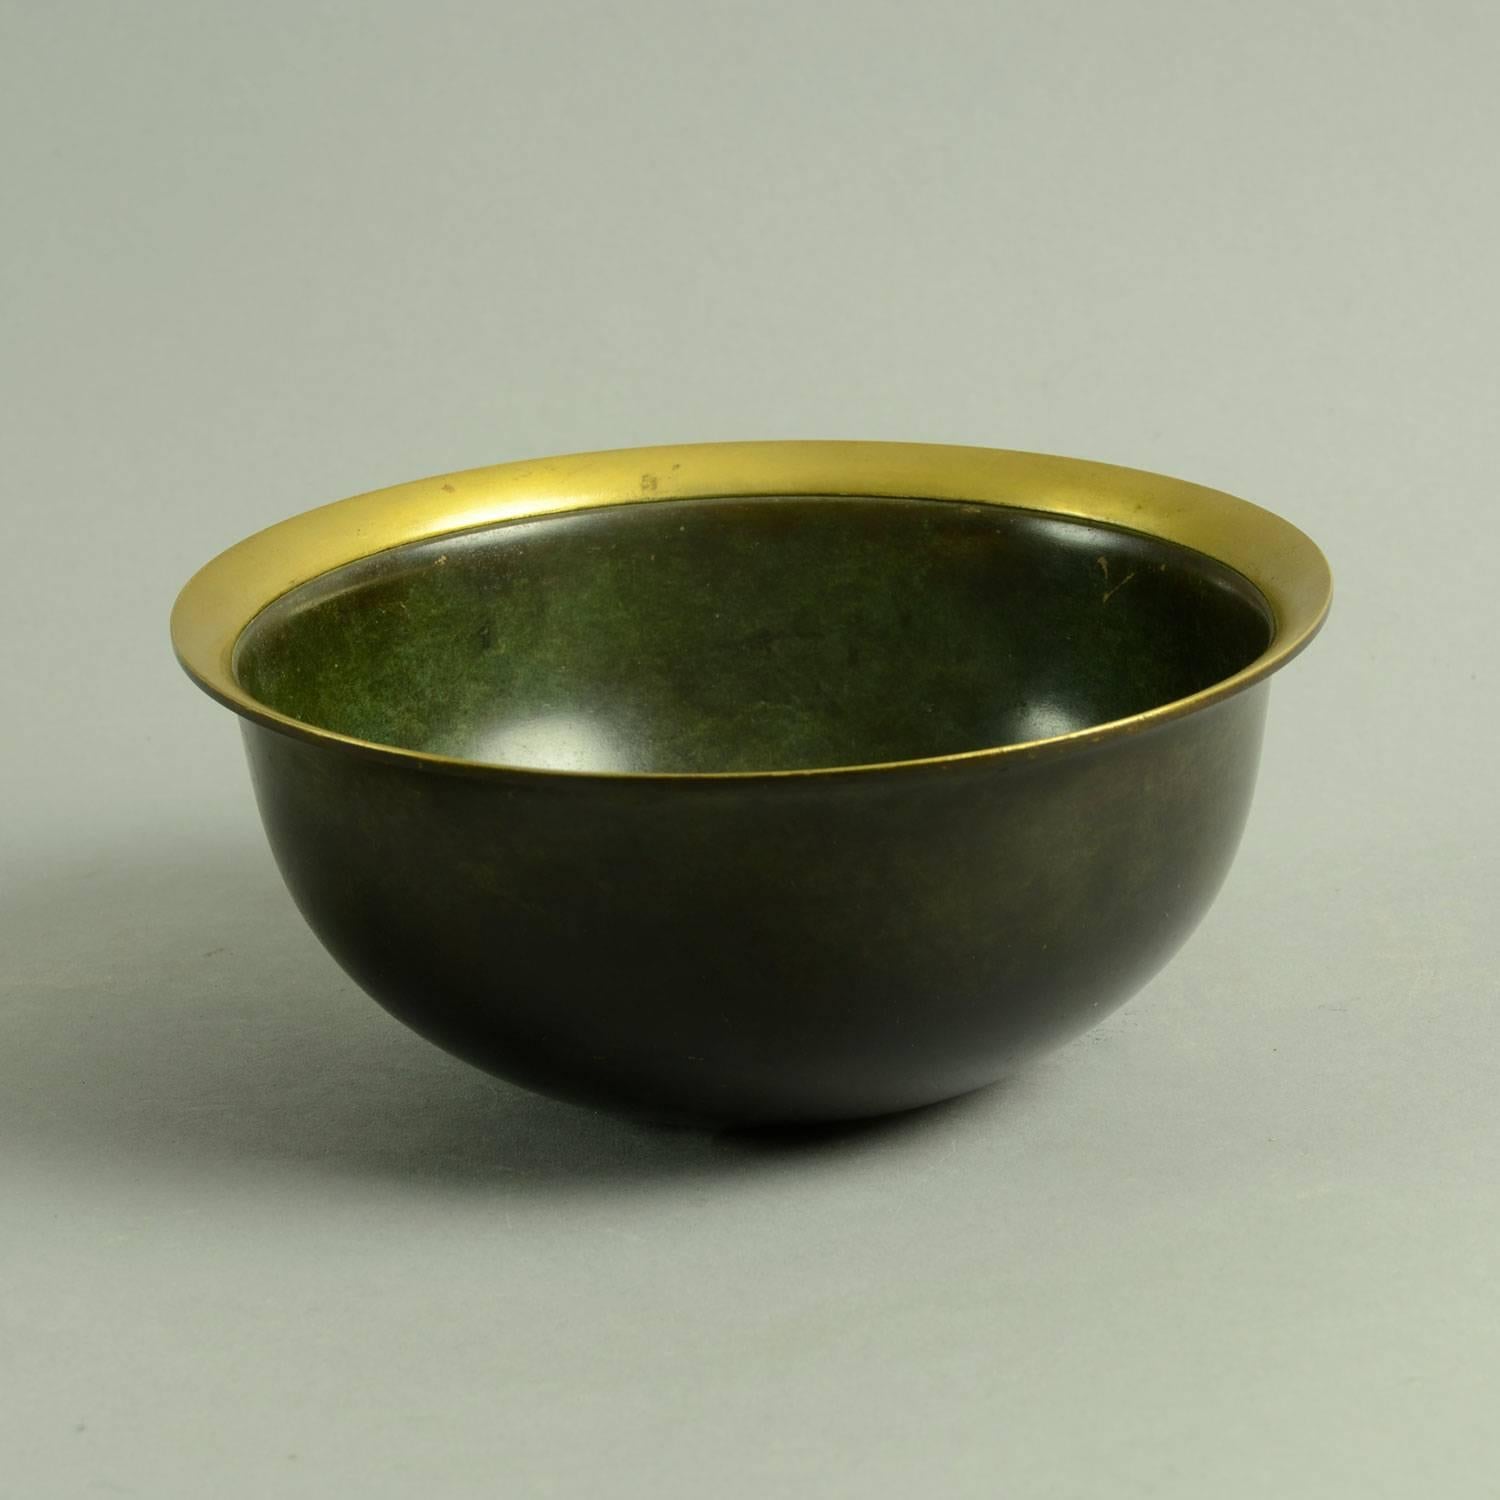 Just Andersen, Denmark

Bronze bowl with turned out polished rim, 1930s.
Measures: Height 2 3/4